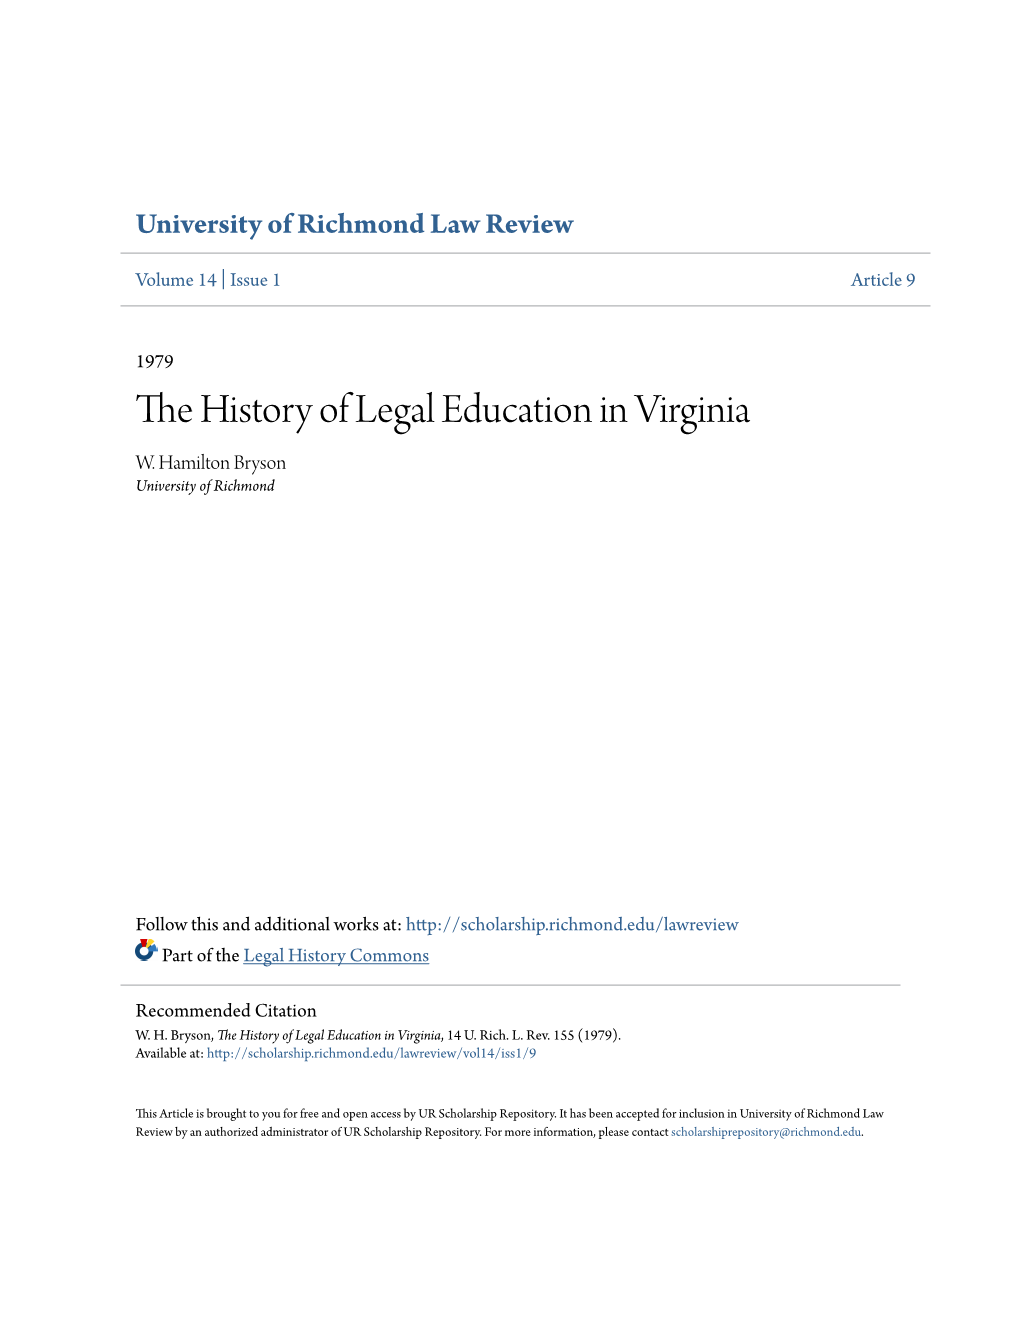 The History of Legal Education in Virginia, 14 U